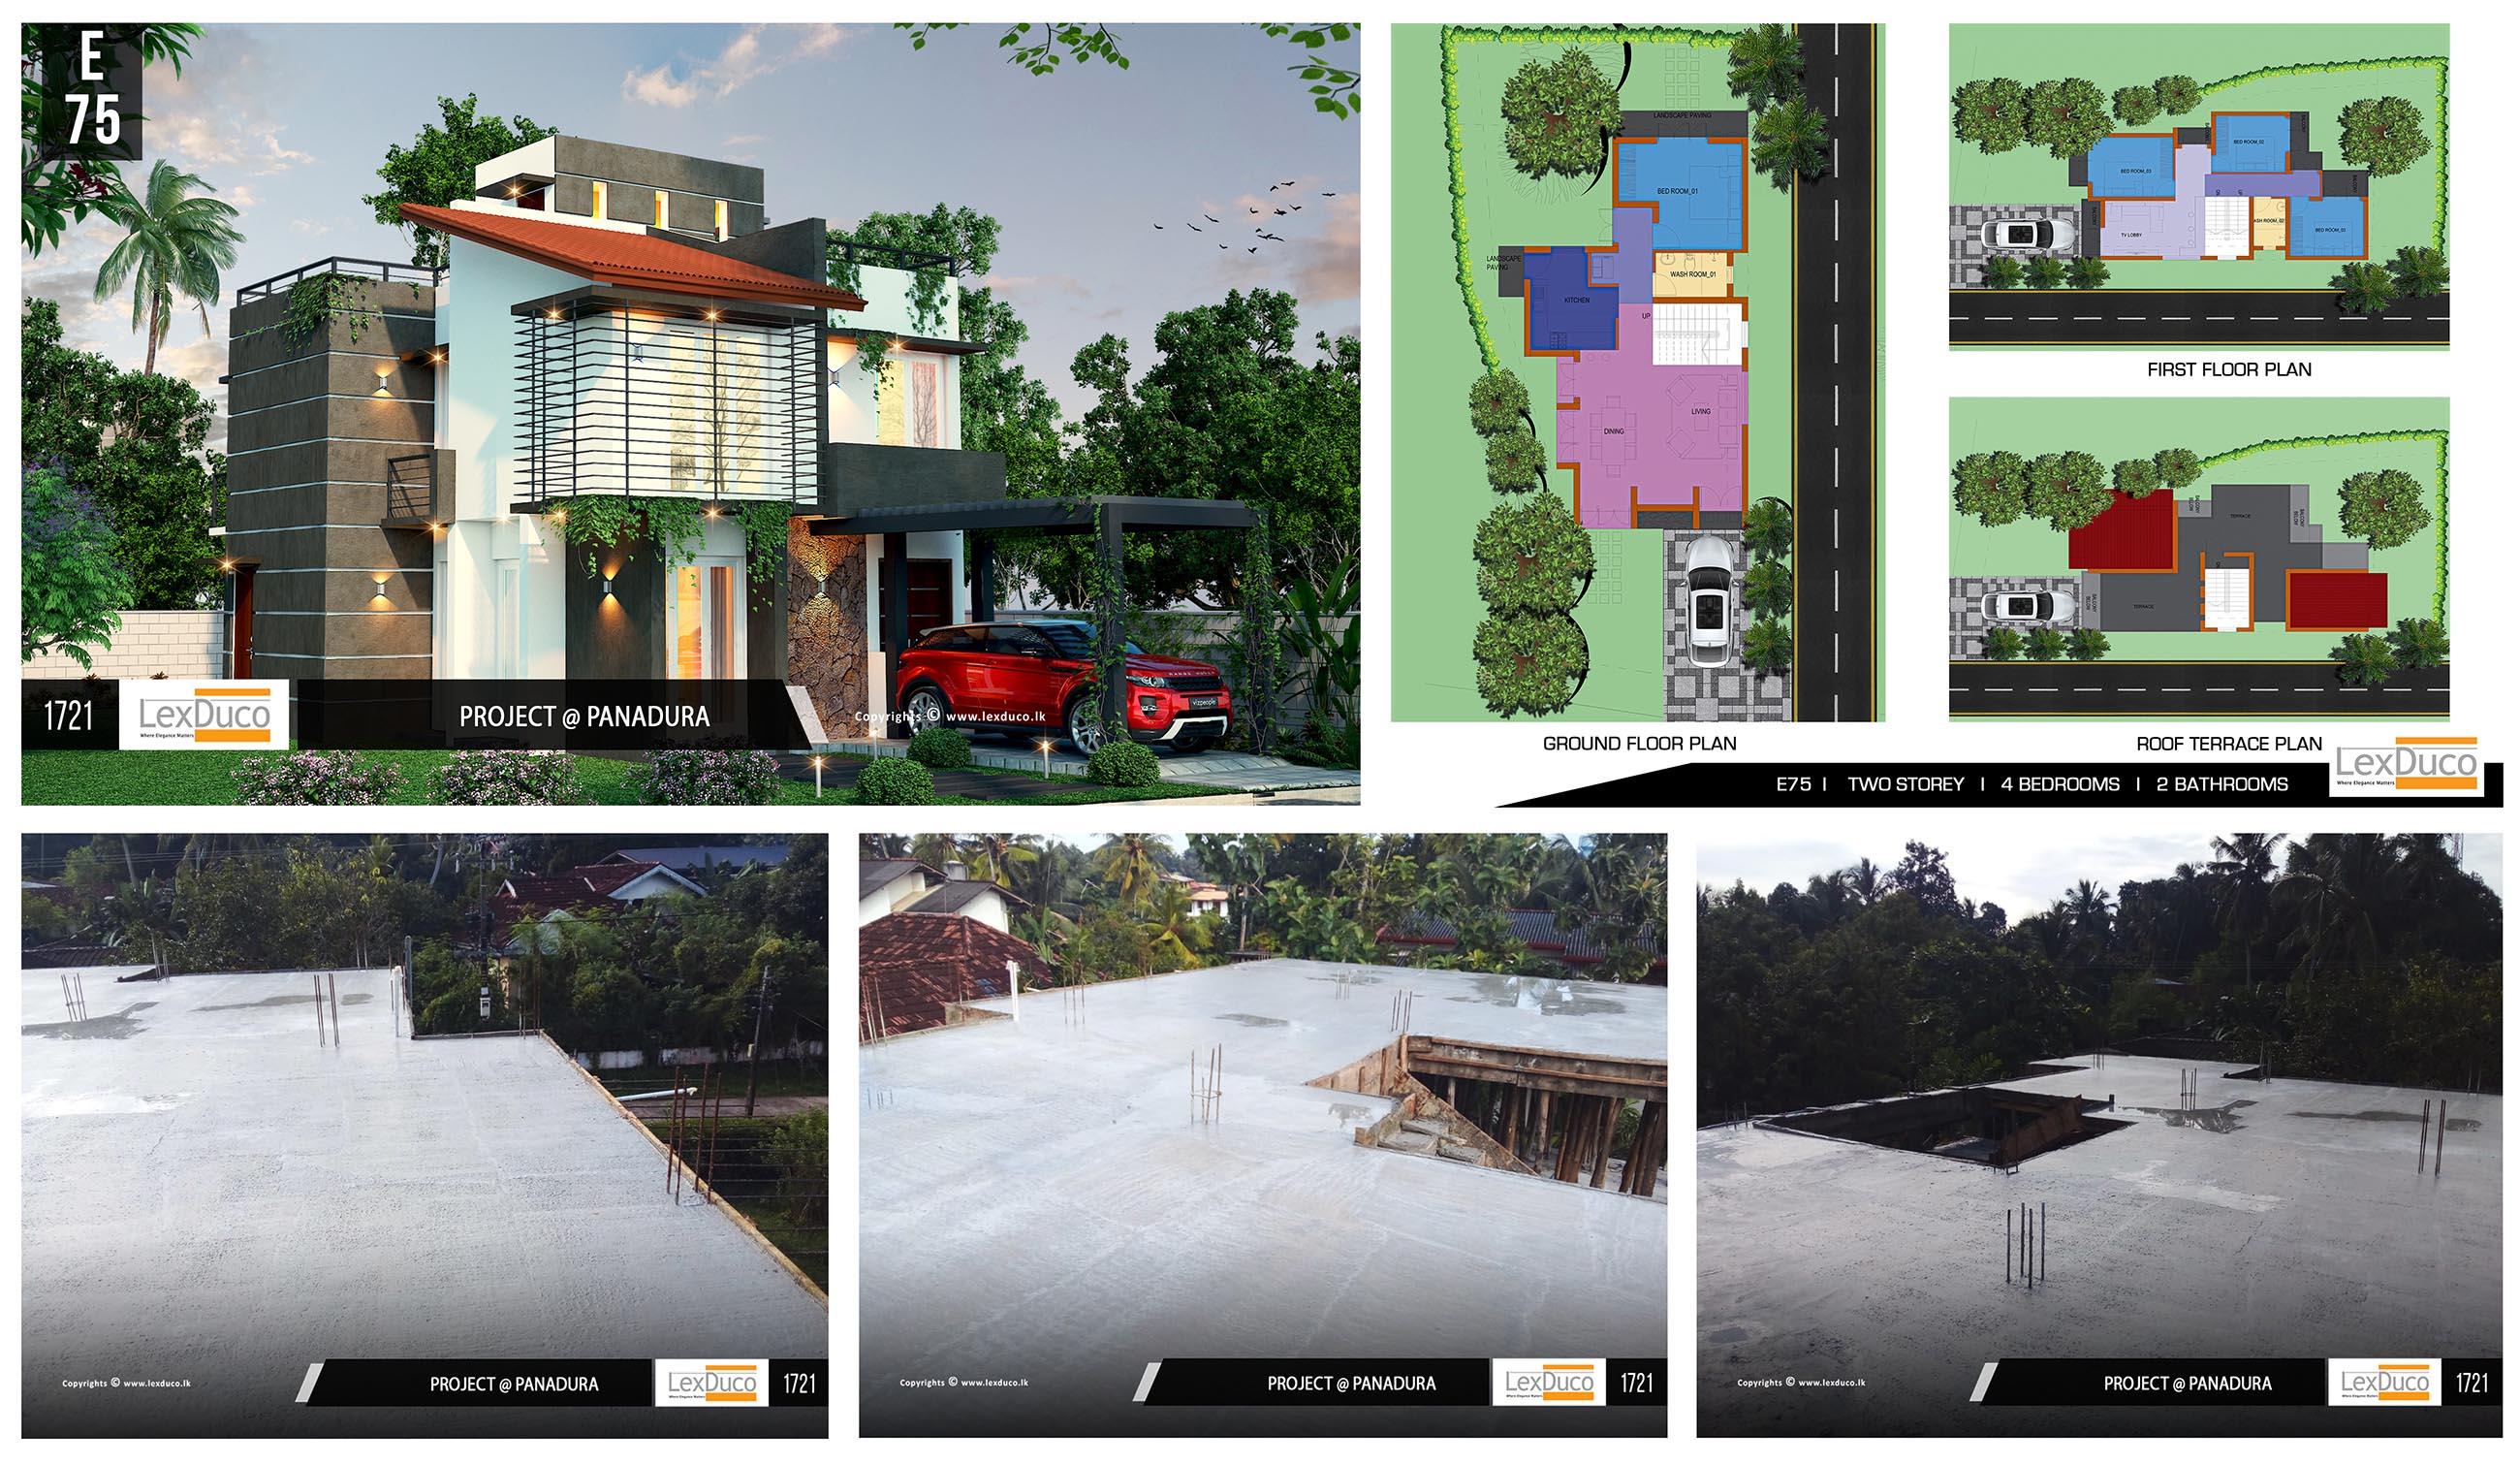 Residential Housing Project at Panadura | Lex Duco